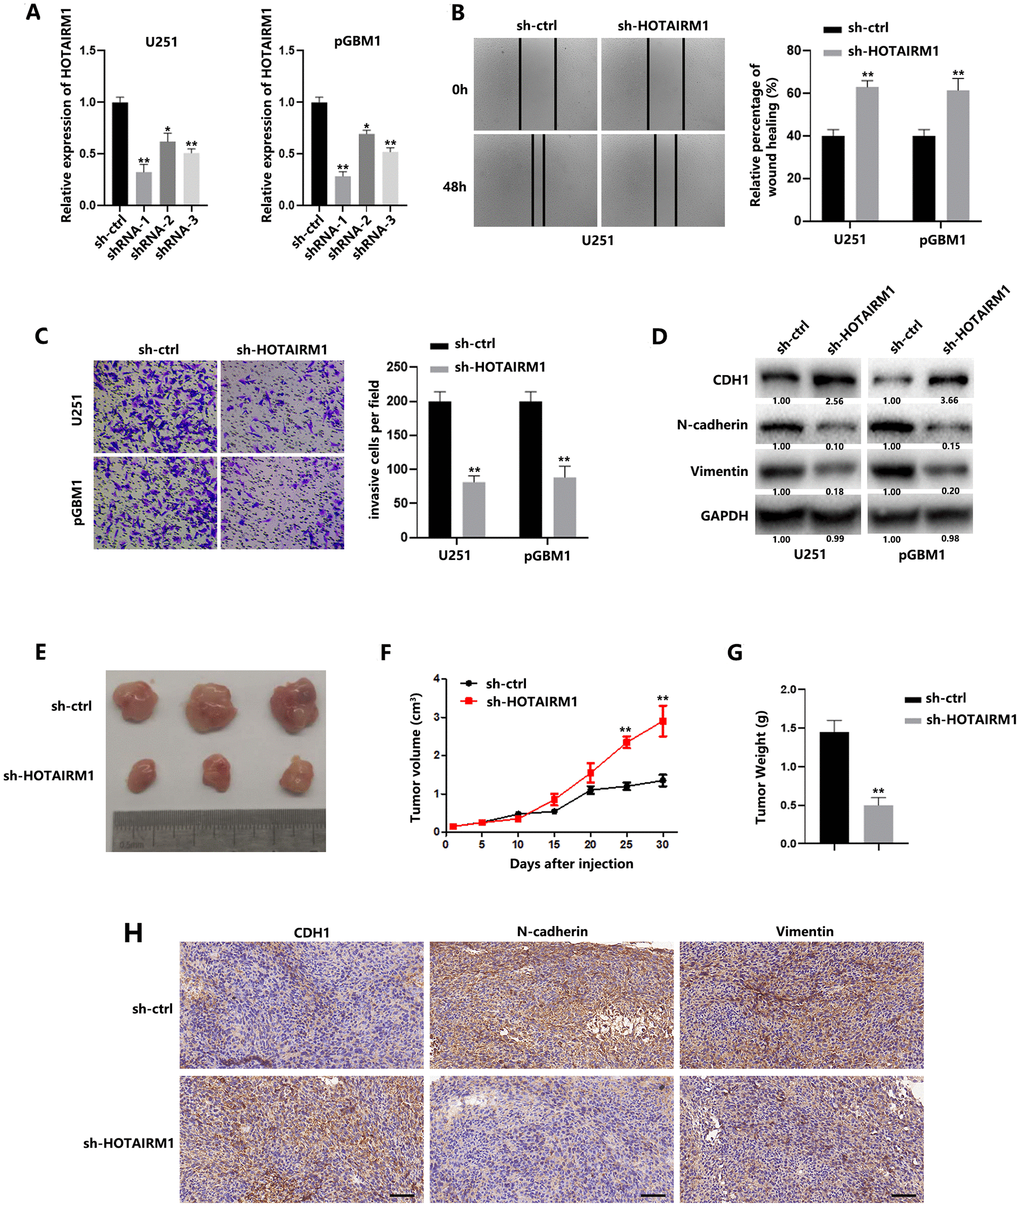 HOTAIRM1 promotes migration and invasion of GBM cells and tumor growth in vivo. (A) Relative expression of HOTAIRM1 in cells transfected with HOTAIRM1 shRNA and negative control. (B) Wound healing assays were used to analyze migration of GBM cells. (C) Matrigel invasion assays were used to analyze invasion of GBM cells. (D) EMT-associated proteins in GBM cells were determined using western blotting. (E) Representative images of subcutaneous tumors originated from sh-ctrl– or sh-HOTAIRM1–transfected pGBM1 cells on the da\ ys indicated. (F) Growth curve of tumors originated from sh-ctrl– or sh-HOTAIRM1–transfected pGBM1 cells. (G) Weight of tumors originated from sh-ctrl– or sh-HOTAIRM1–transfected pGBM1 cells. (H) Representative IHC results of CDH1, N-cadherin and Vimentin in tumors. *P P 